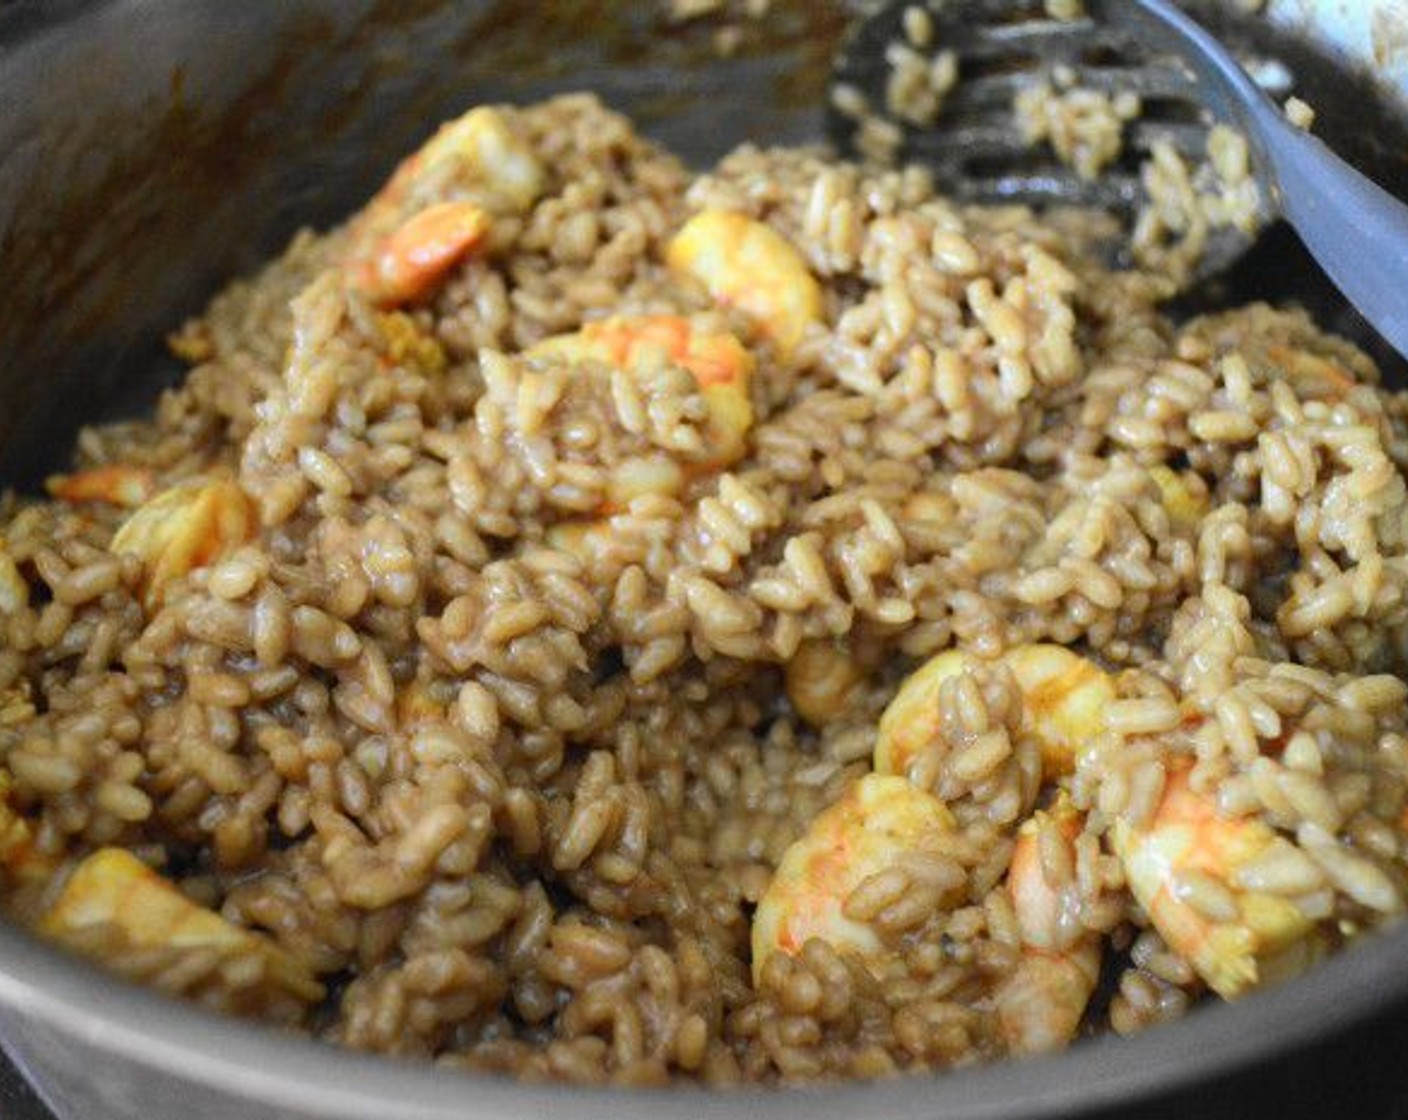 step 10 At this point get the shrimp back into the pan to warm them through along with the remaining Plain Greek Yogurt (1 Tbsp). Stir it all together to combine it into a luscious curried shrimp risotto. Take it off the heat.